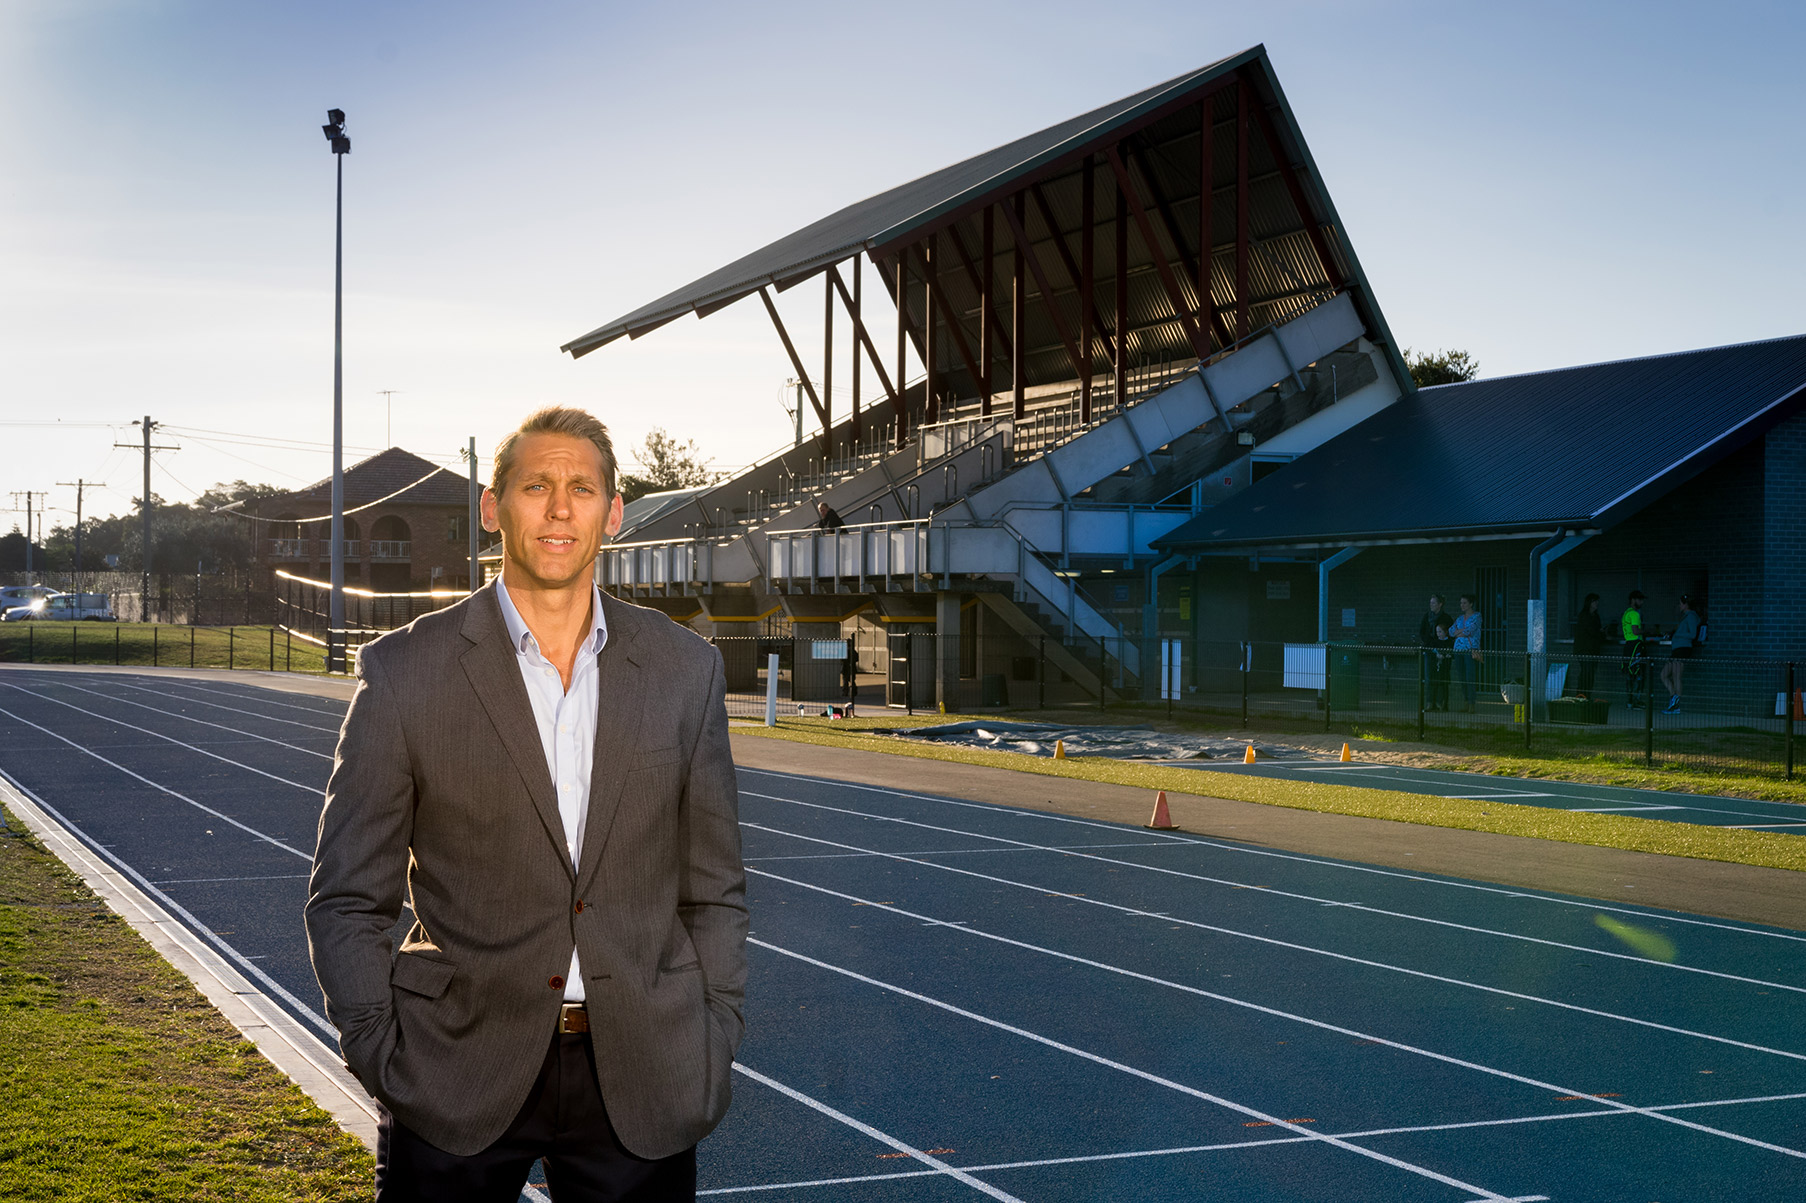 David Lubans stands on a running track with a stadium in the background looking at the camera. He is wearing a suit jacket and has his hands in his pockets